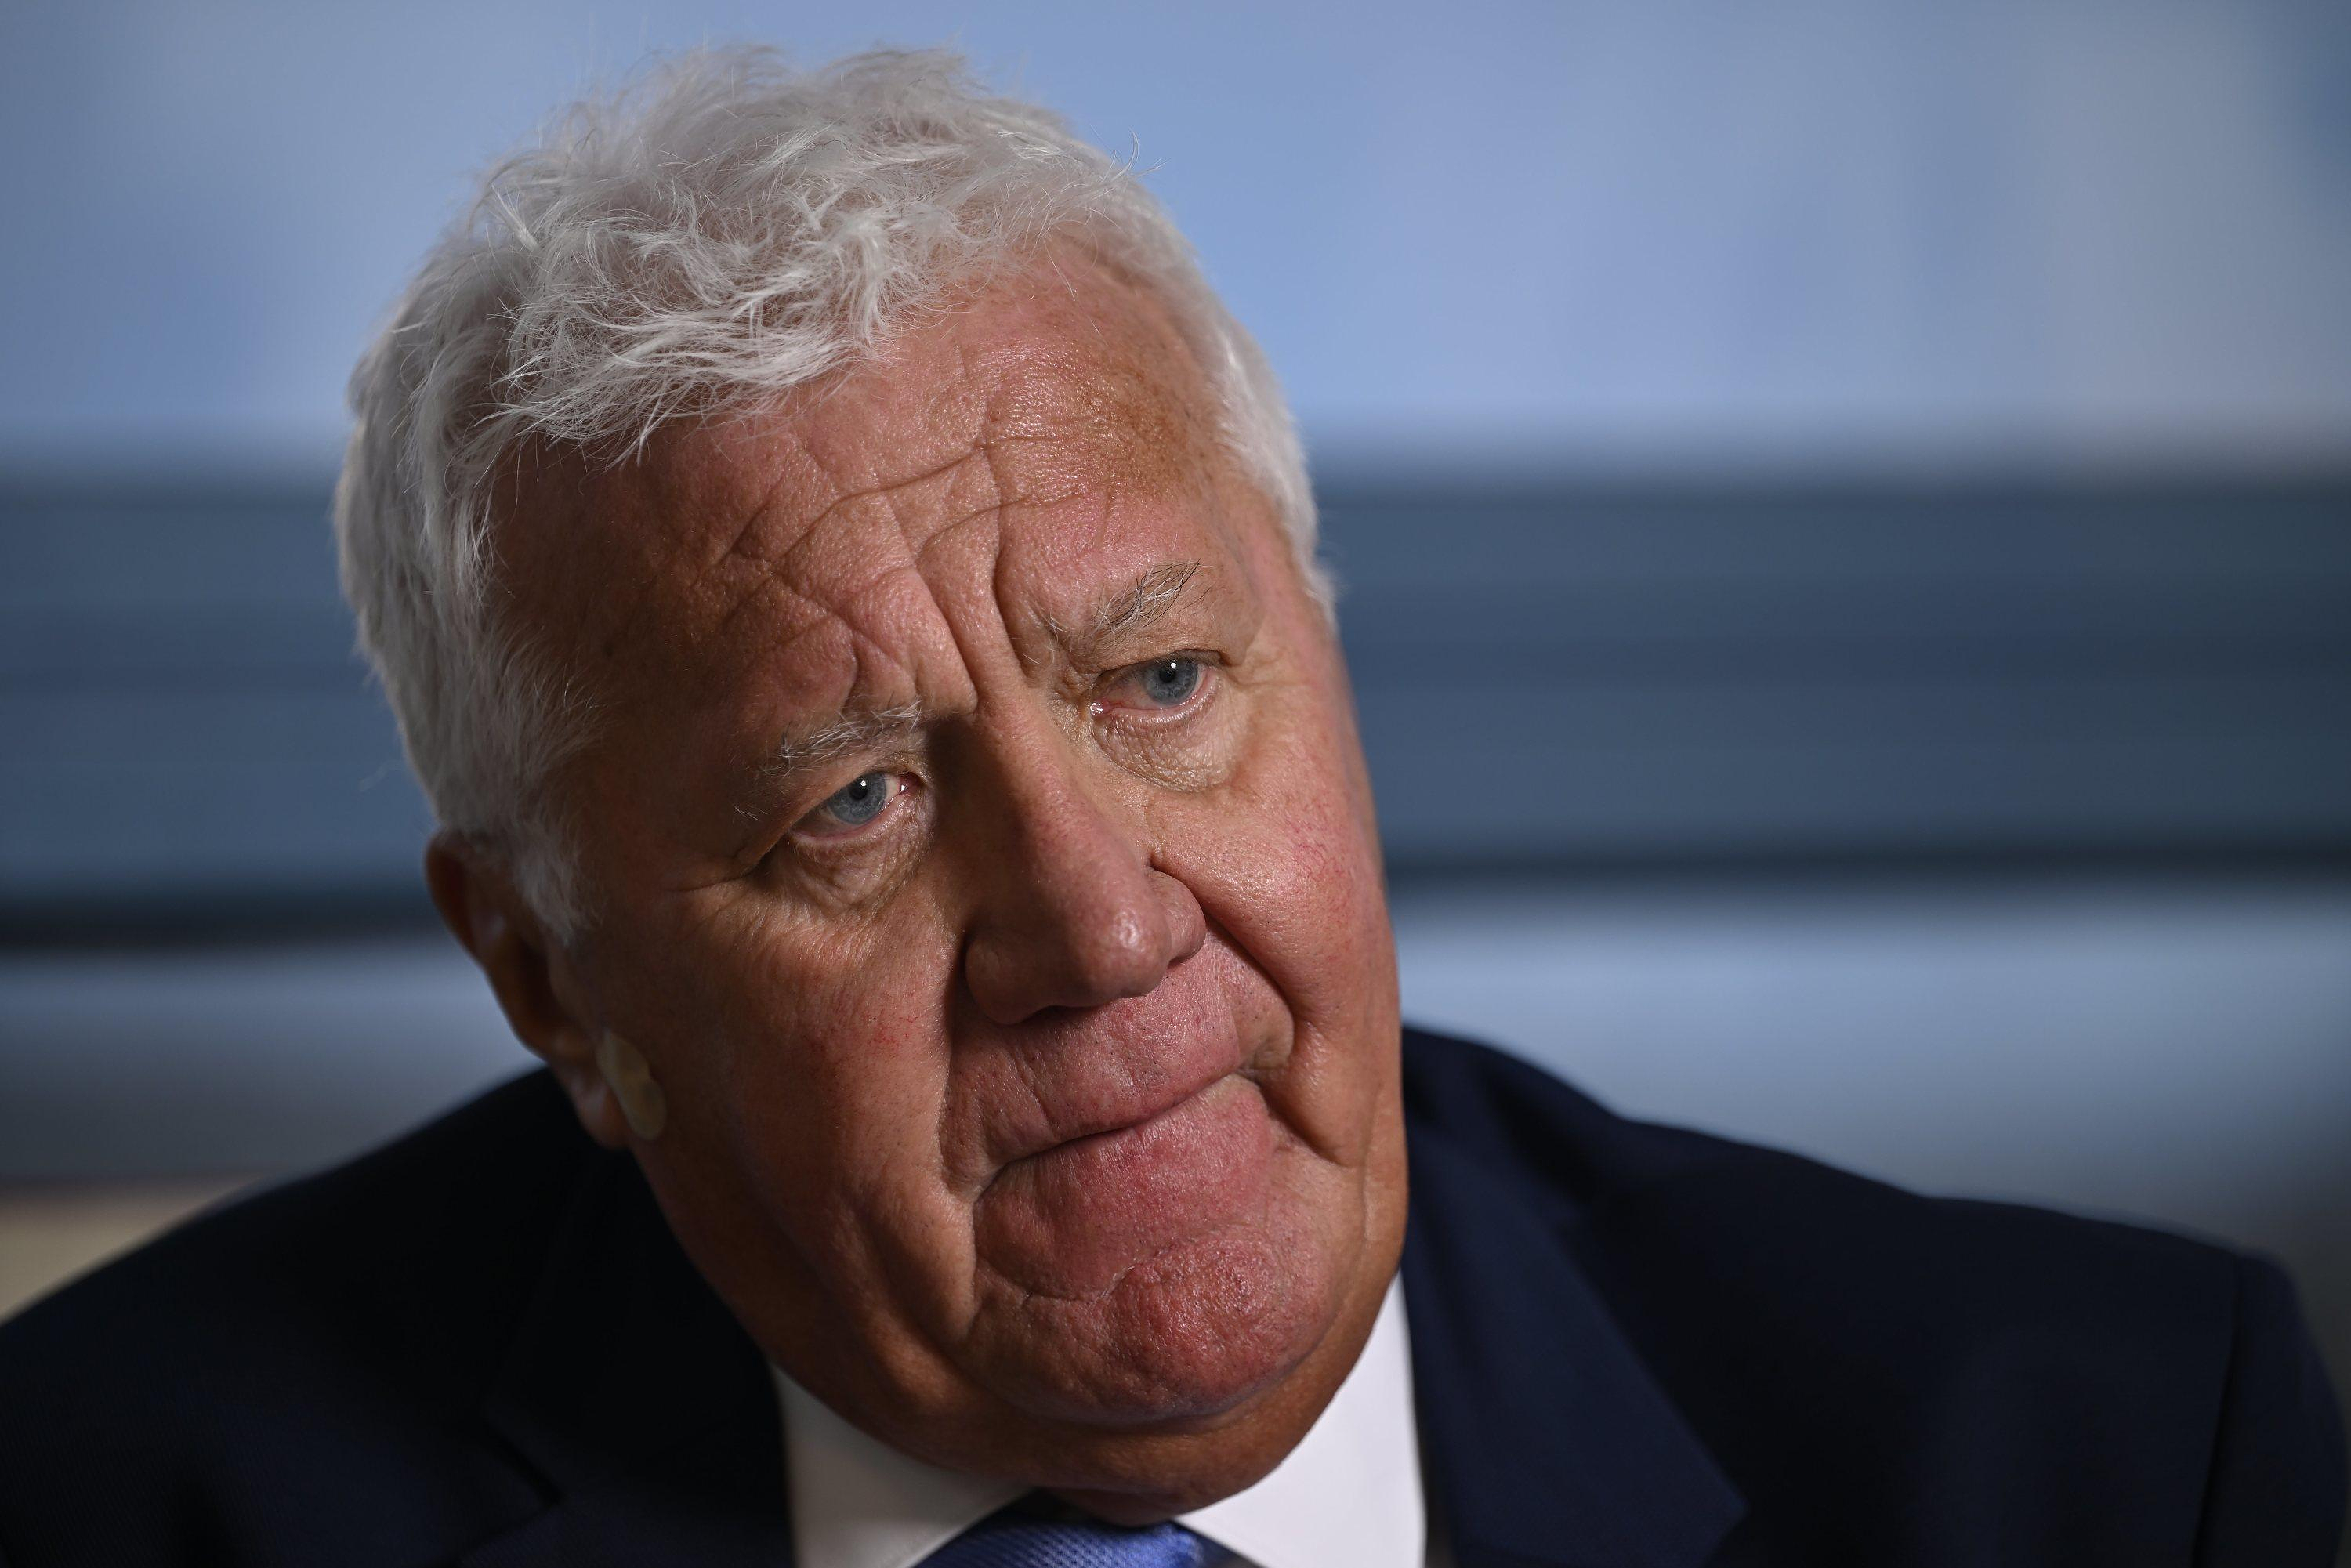 “It was never my intention to hurt”: Patrick Lefevere apologizes for his “denigrating remarks towards women”